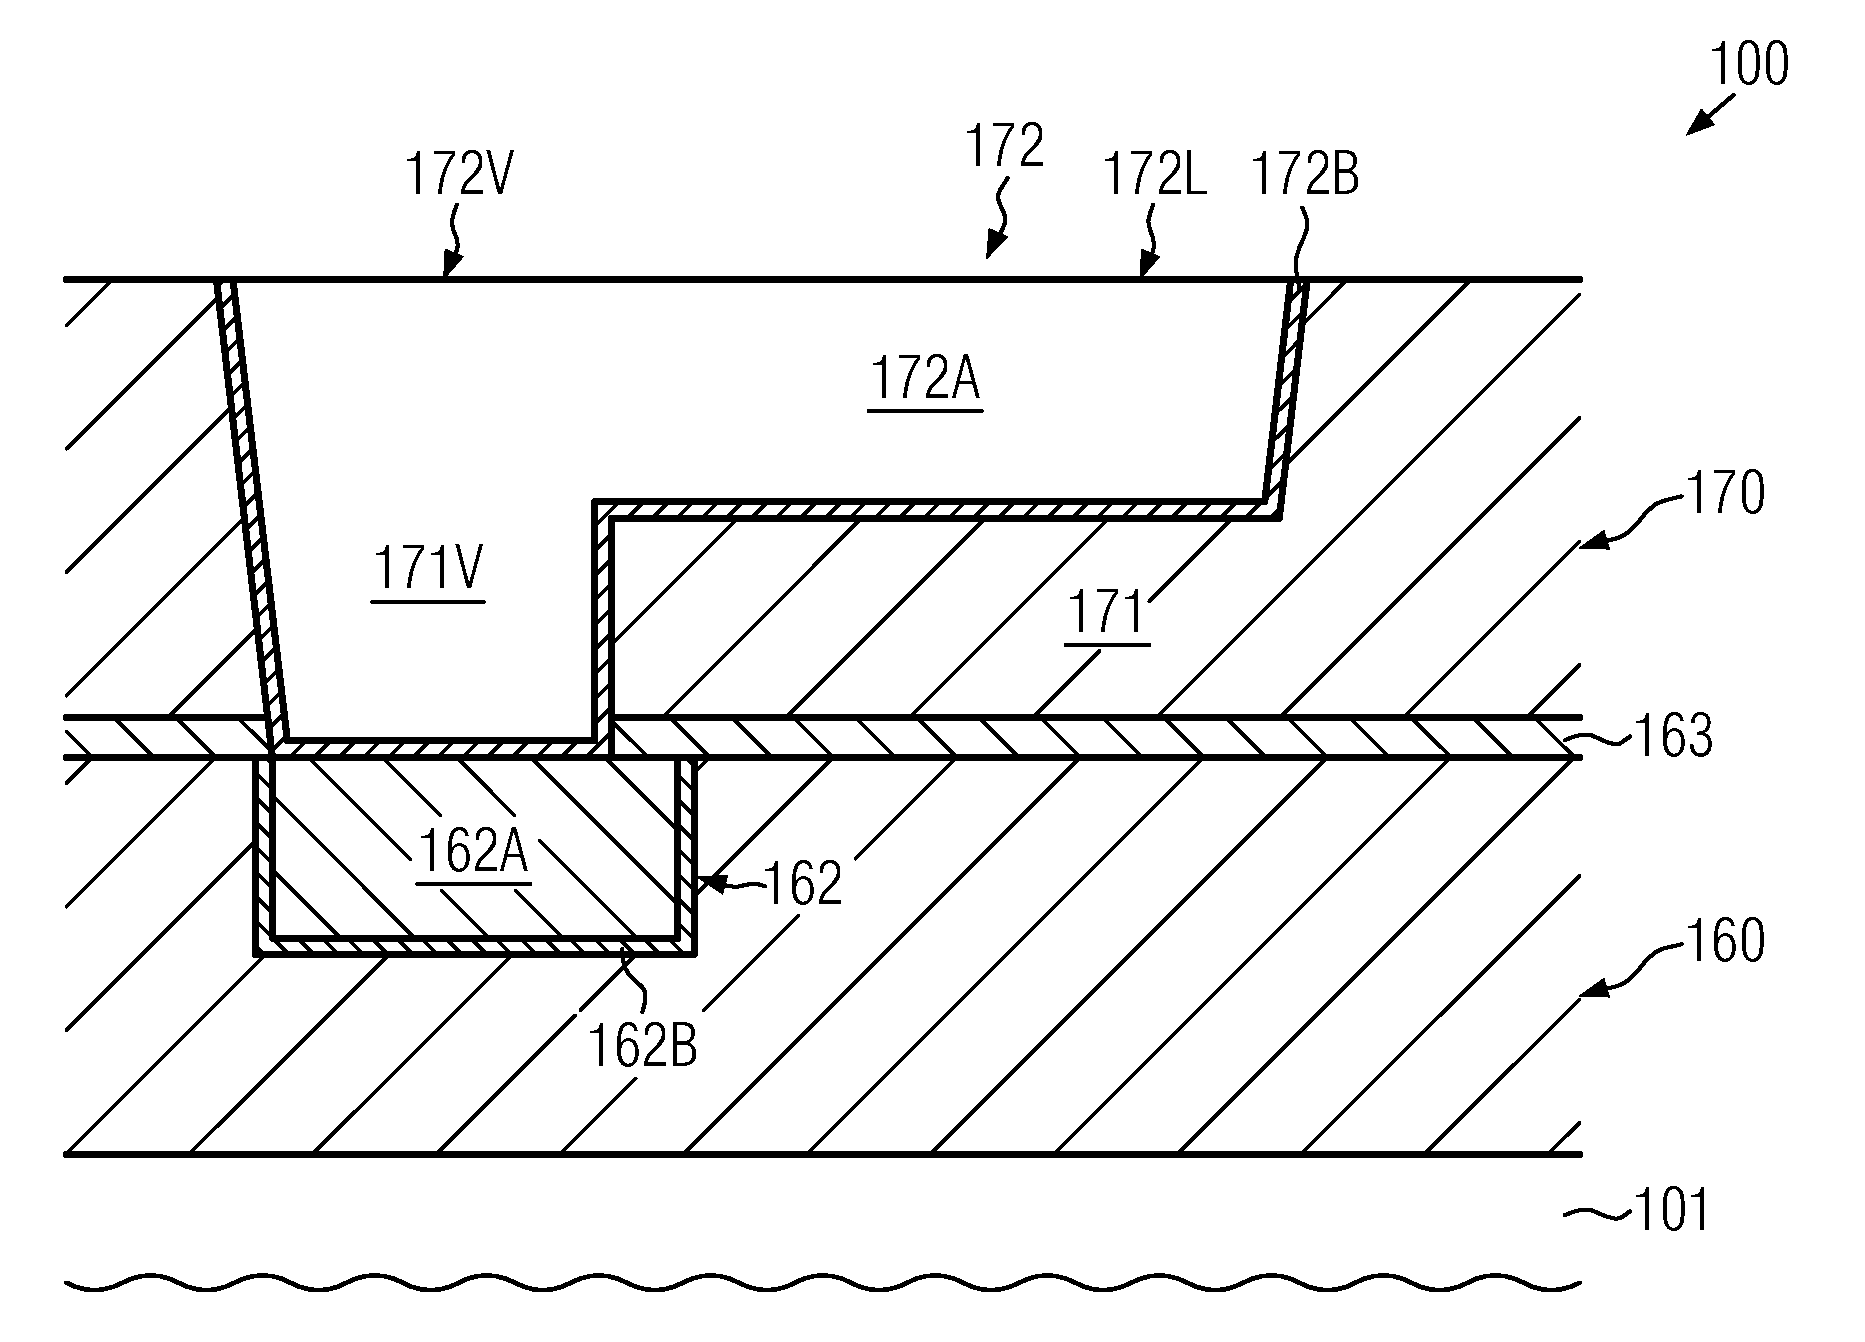 Metallization systems of semiconductor devices comprising a copper/silicon compound as a barrier material